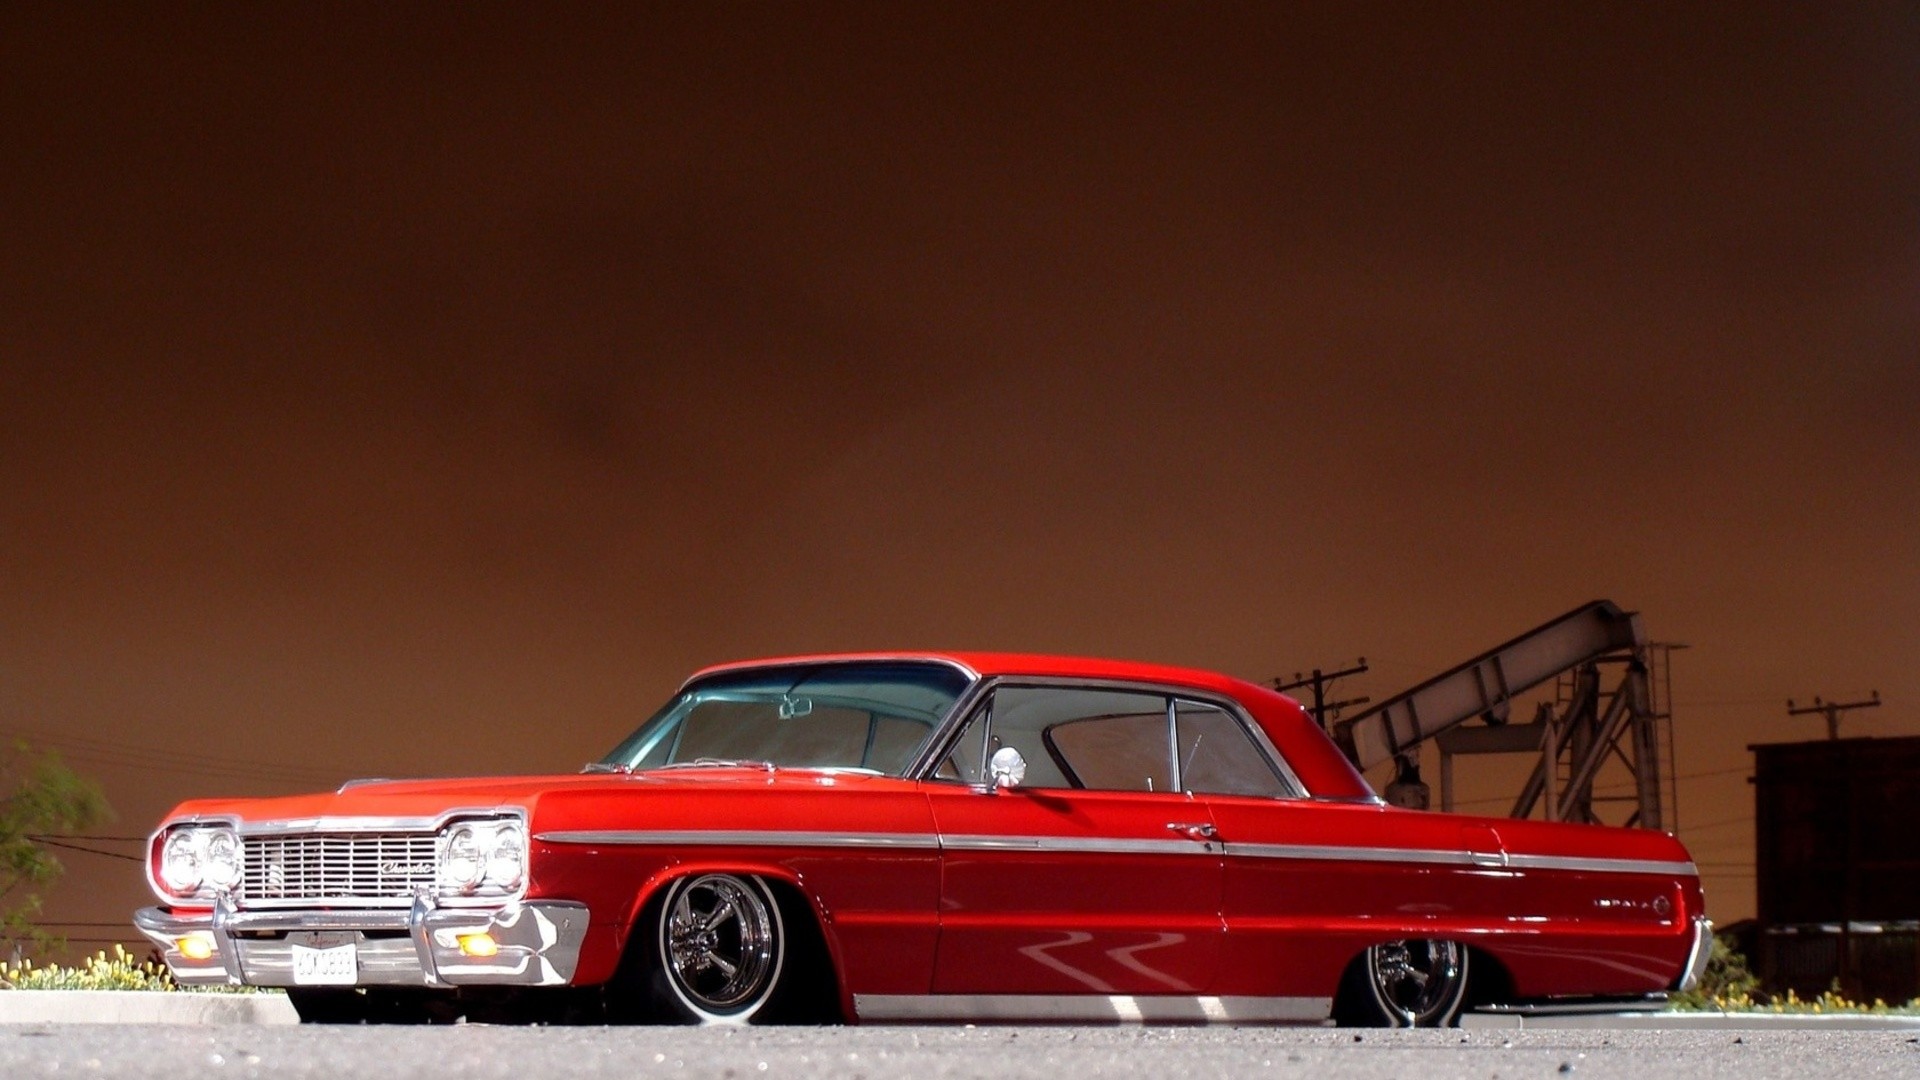 1920x1080 Chevrolet Impala Tuning Low Red Classic Muscle Cars Wallpaper .